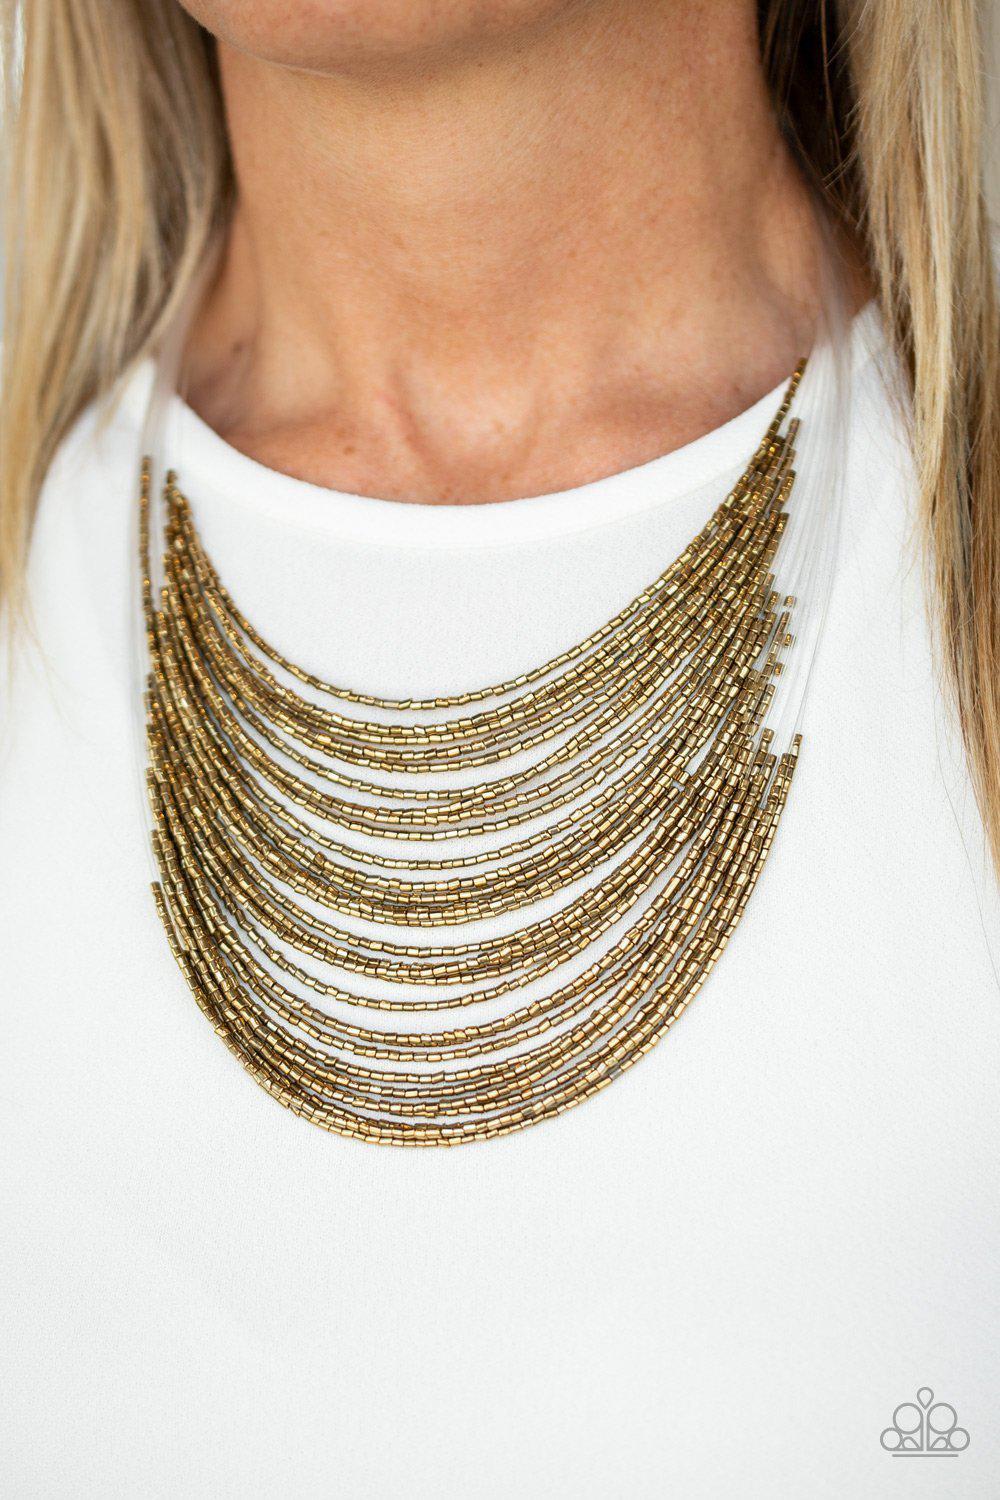 Catwalk Queen Brass Seed Bead Necklace - Paparazzi Accessories-CarasShop.com - $5 Jewelry by Cara Jewels